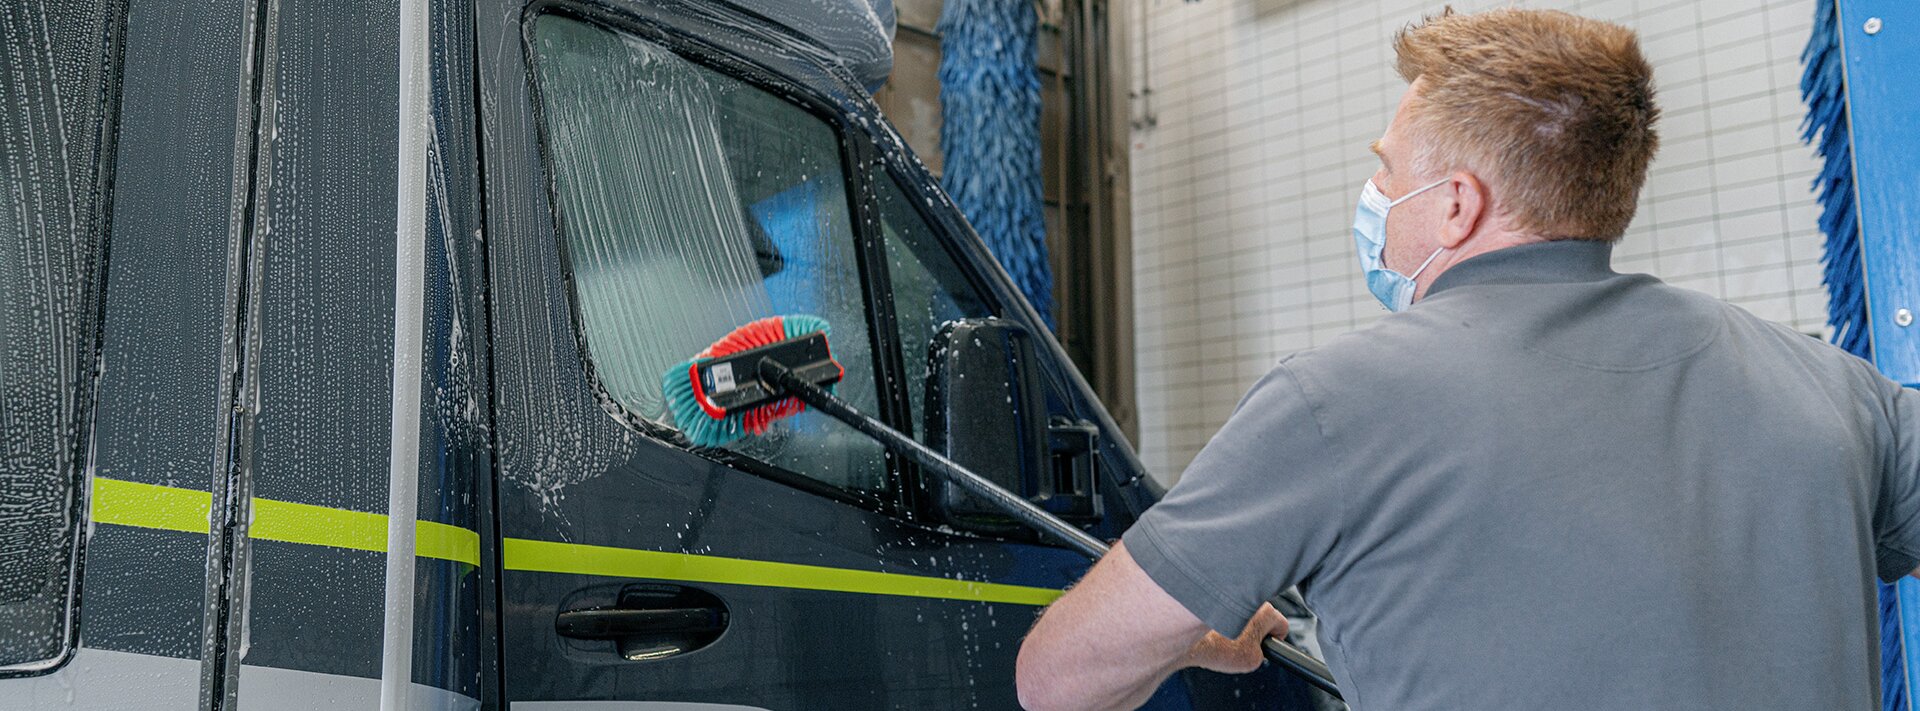 HYMER owner cleaning a HYMER CrossOver with a soapy wash brush in the wash hall